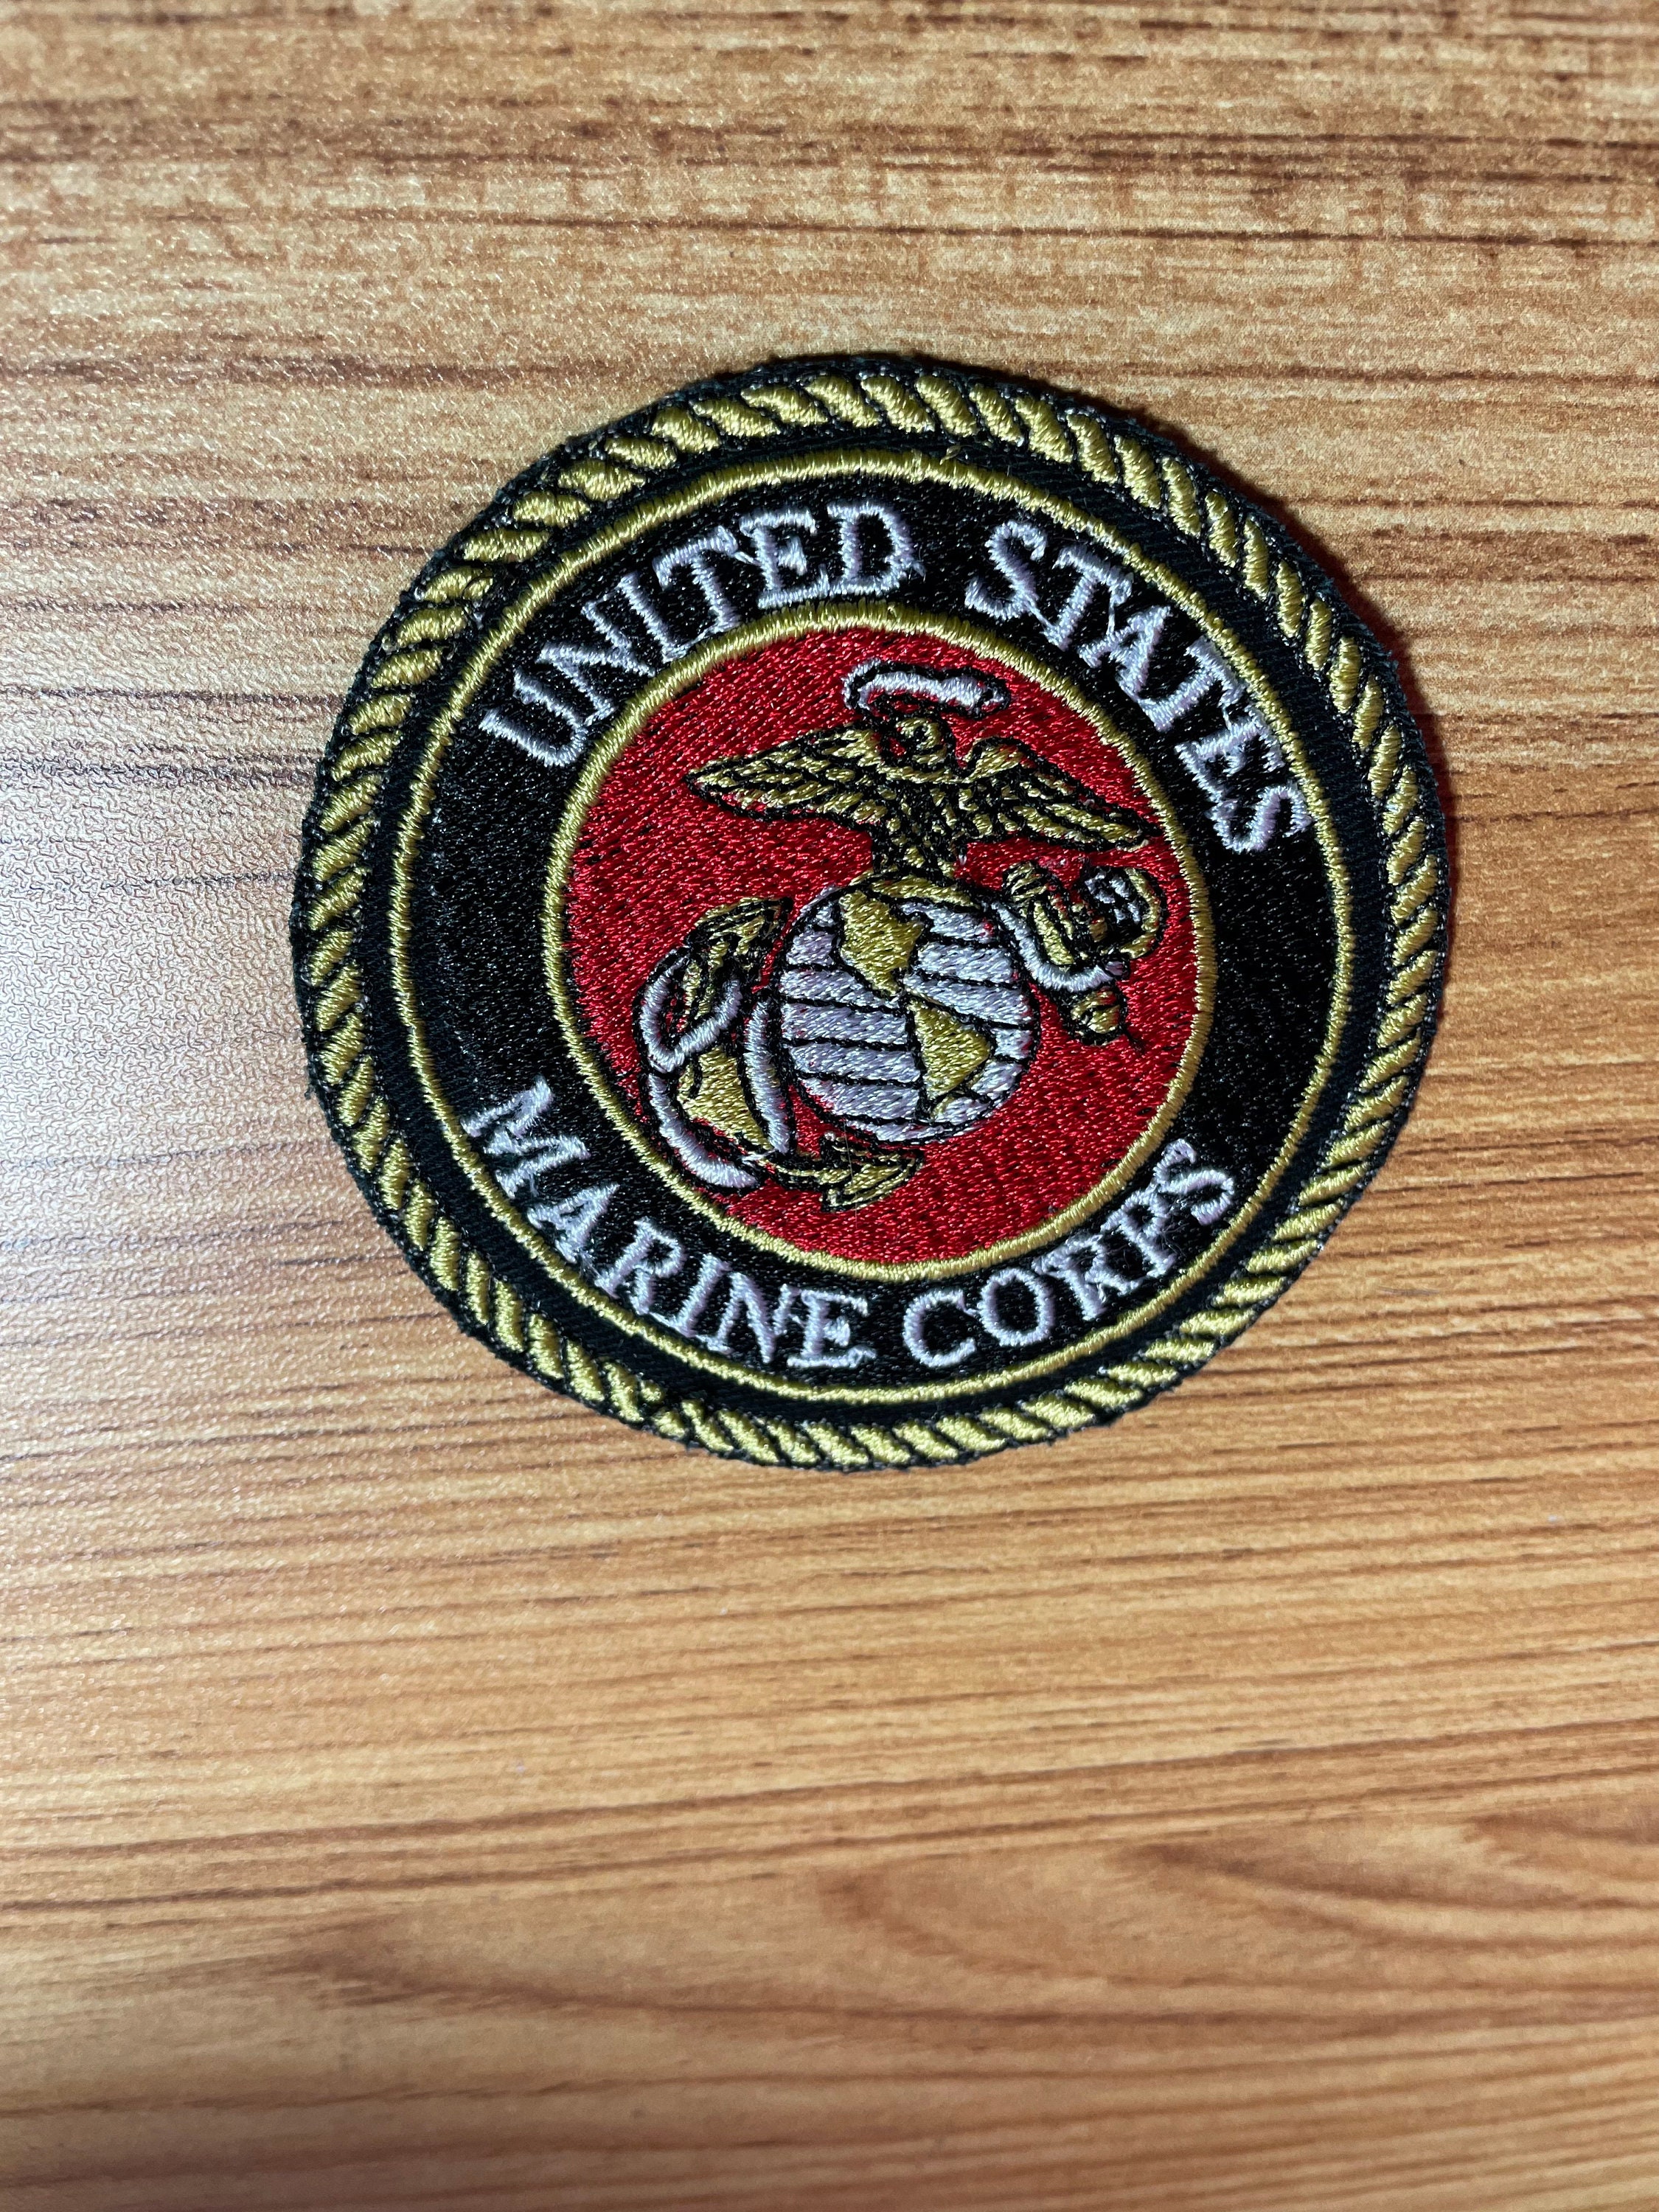 Embroidered Patch - USMC United States Marine Corps, Military – Crazy  Novelty Guy